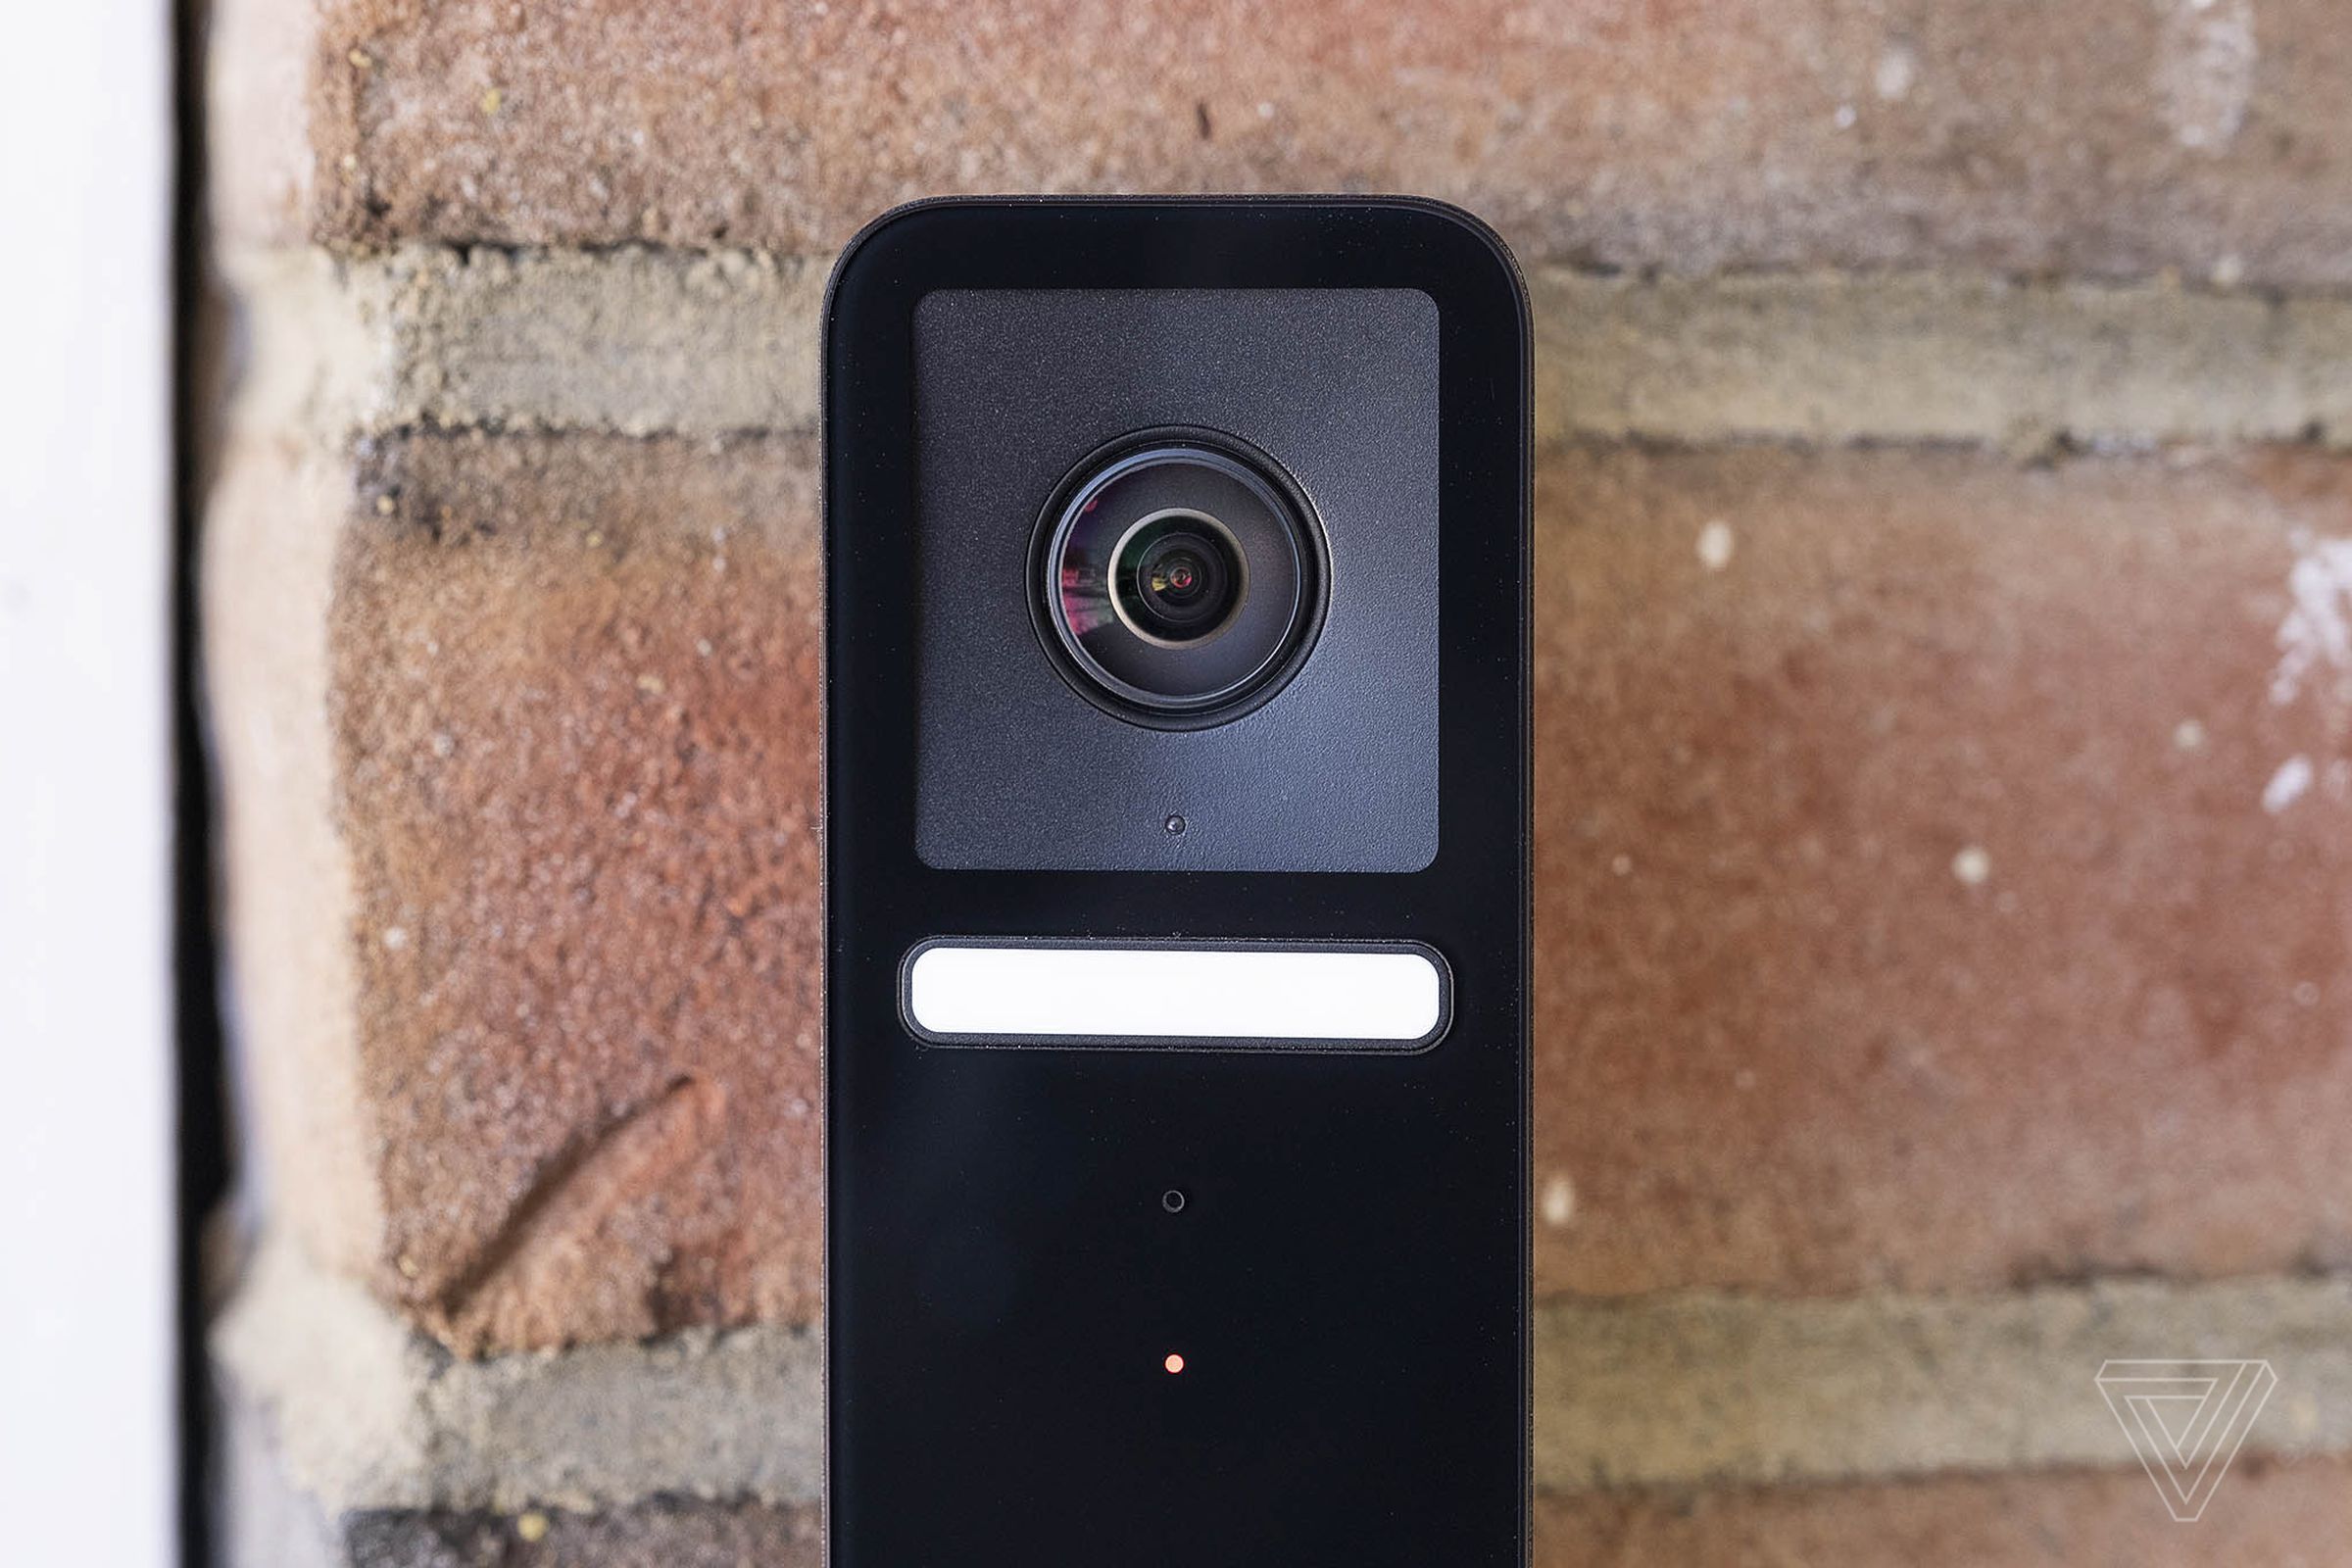 The Circle View Doorbell has a 5-megapixel camera with a tall aspect ratio that lets you see visitors from head to toe.